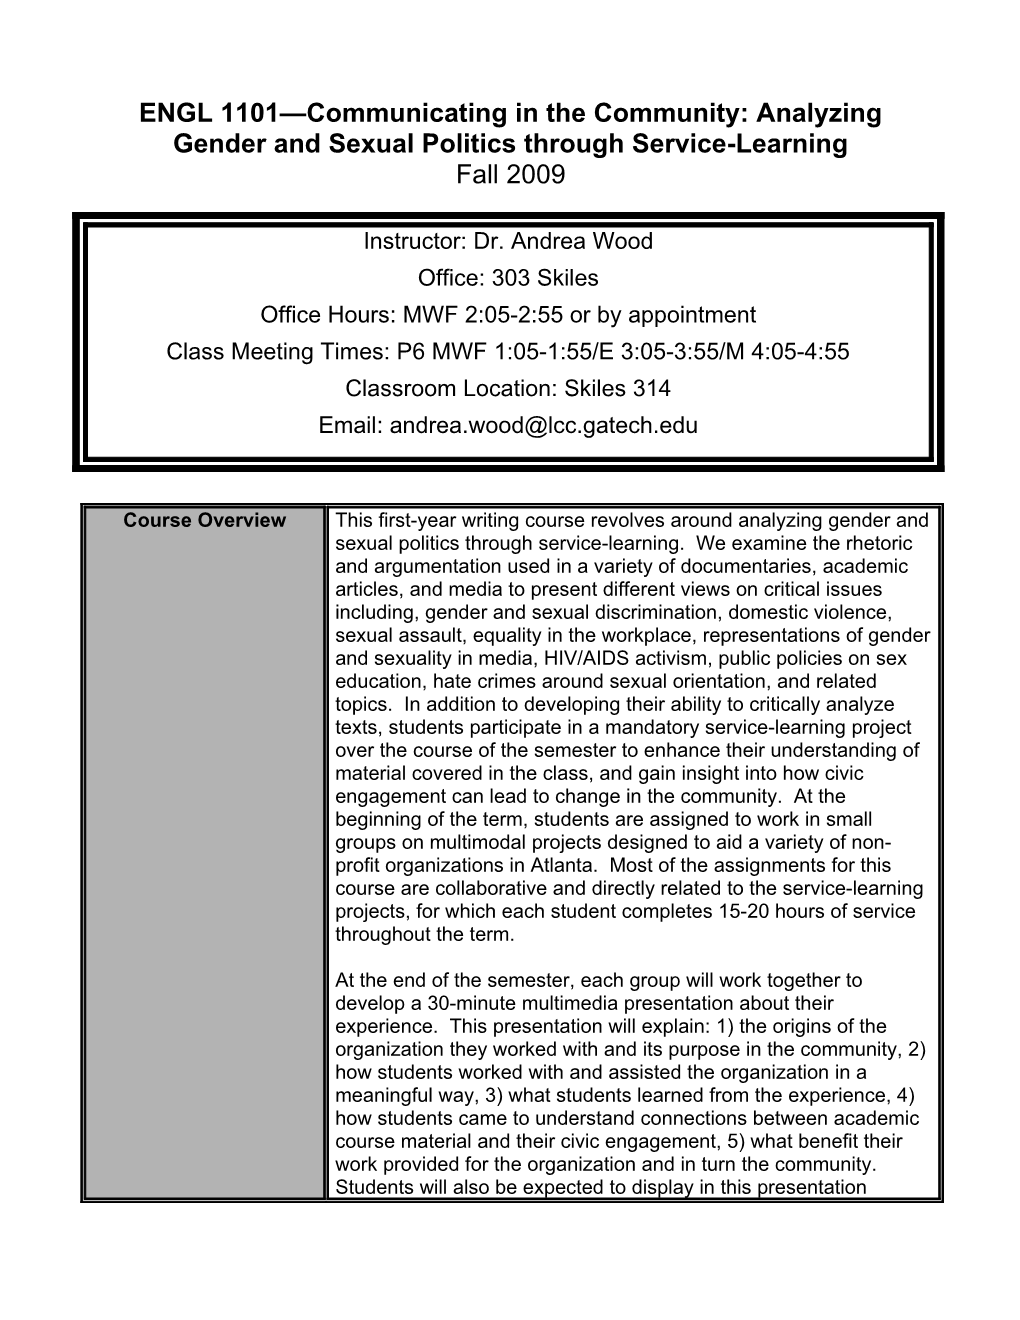 ENGL 1101: Communicating in the Community: Understanding Gender and Sexual Politics Through